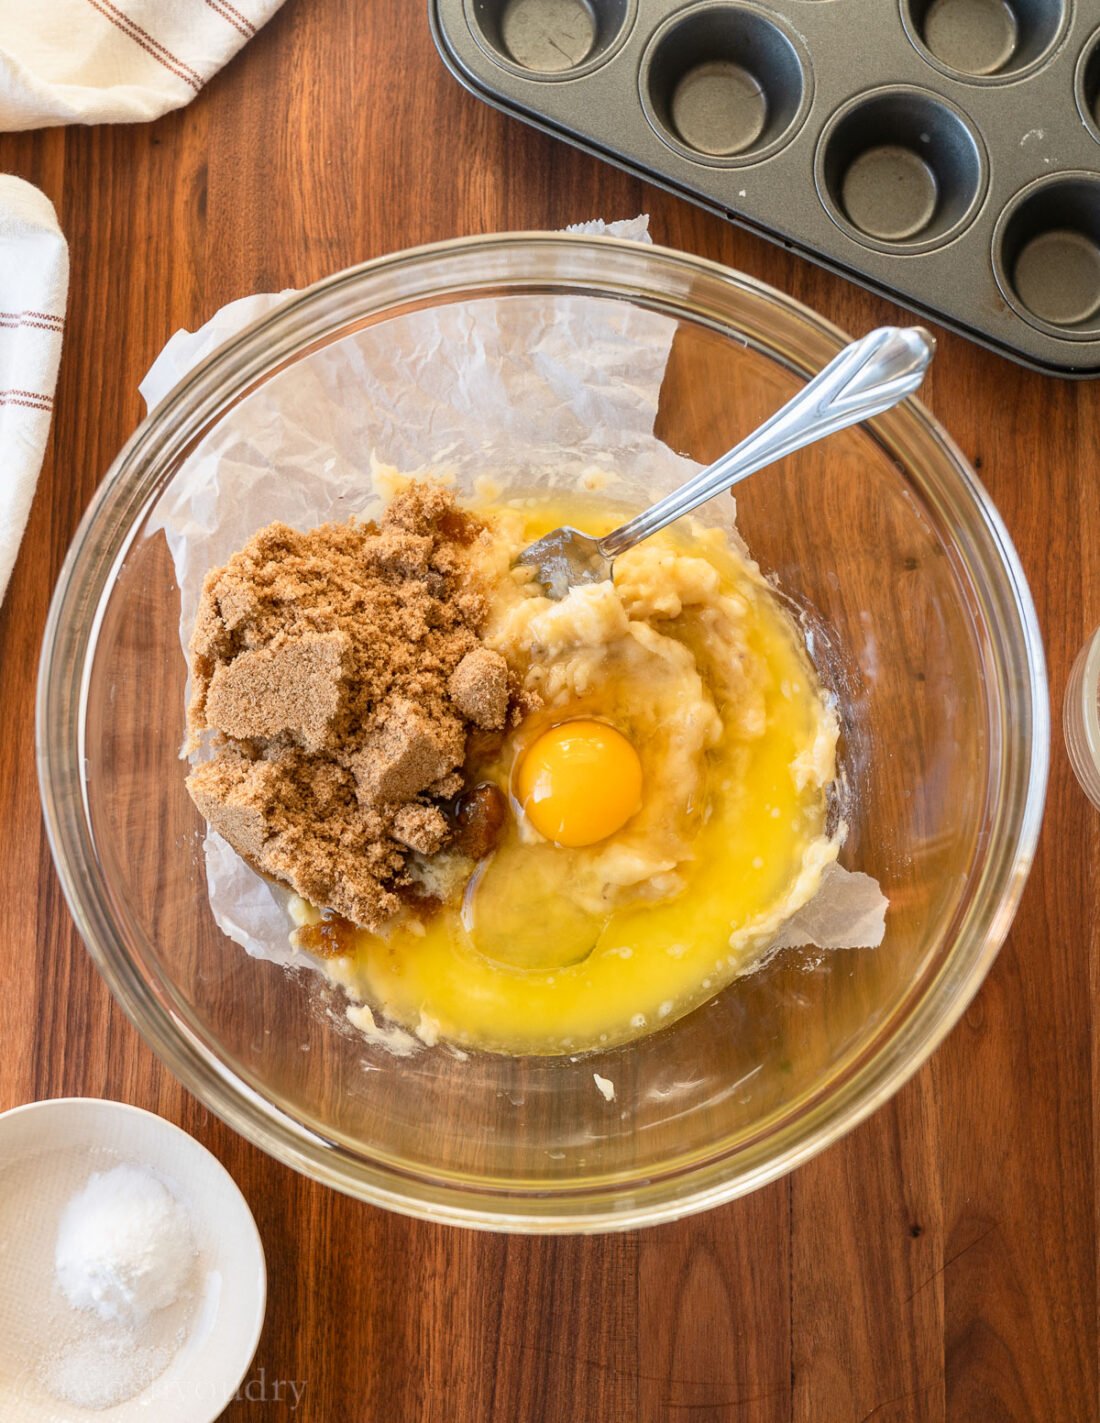 brown sugar, egg and bananas in a bowl with a fork.